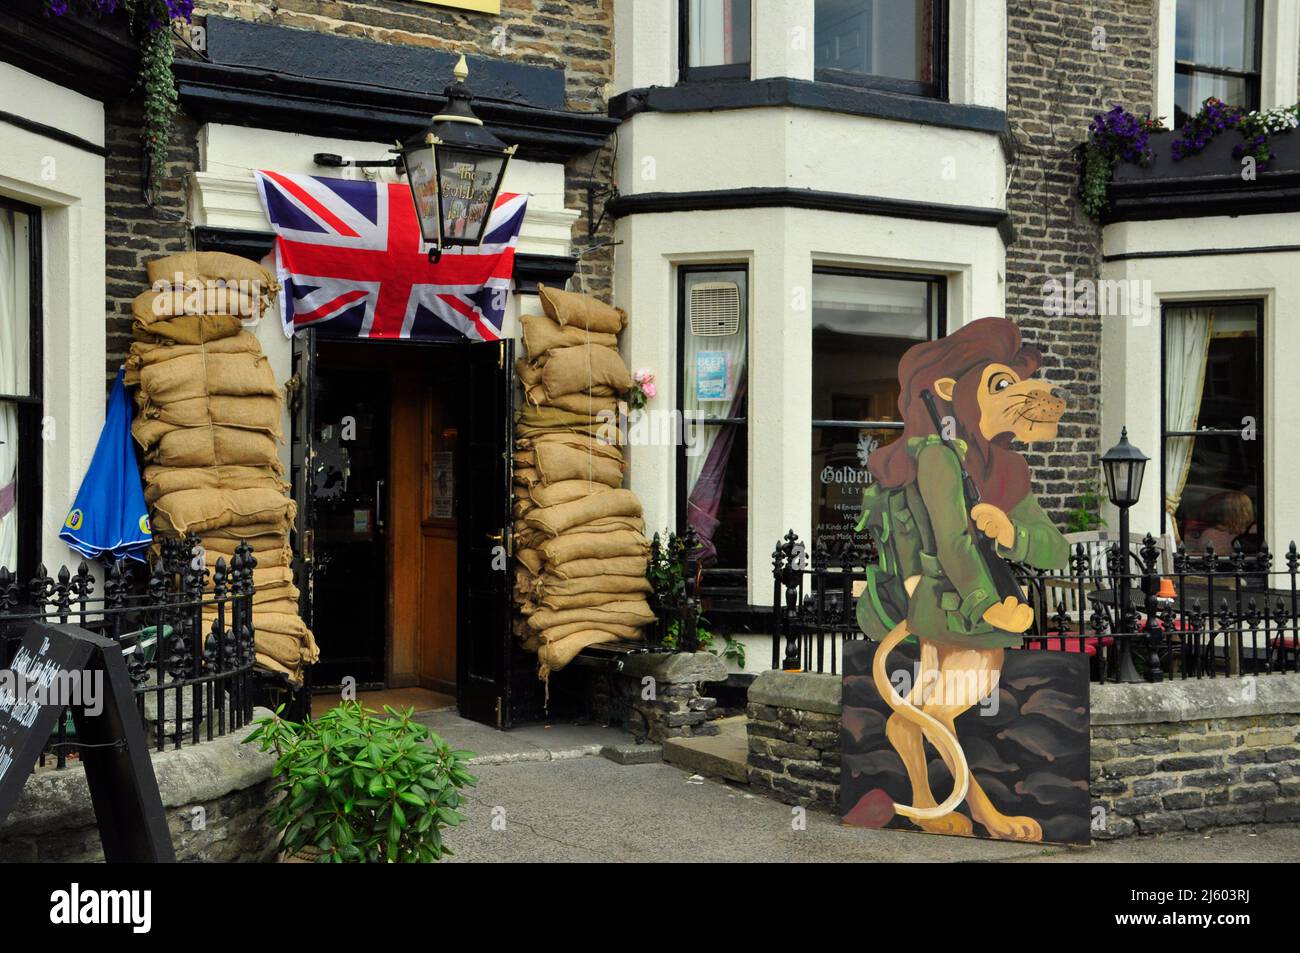 The Golden Lion family pub in the heart of the town of Leyburn in the Yorkshire Dales, decked out for a WW2 event in the summer of 2016. A sandbagged Stock Photo